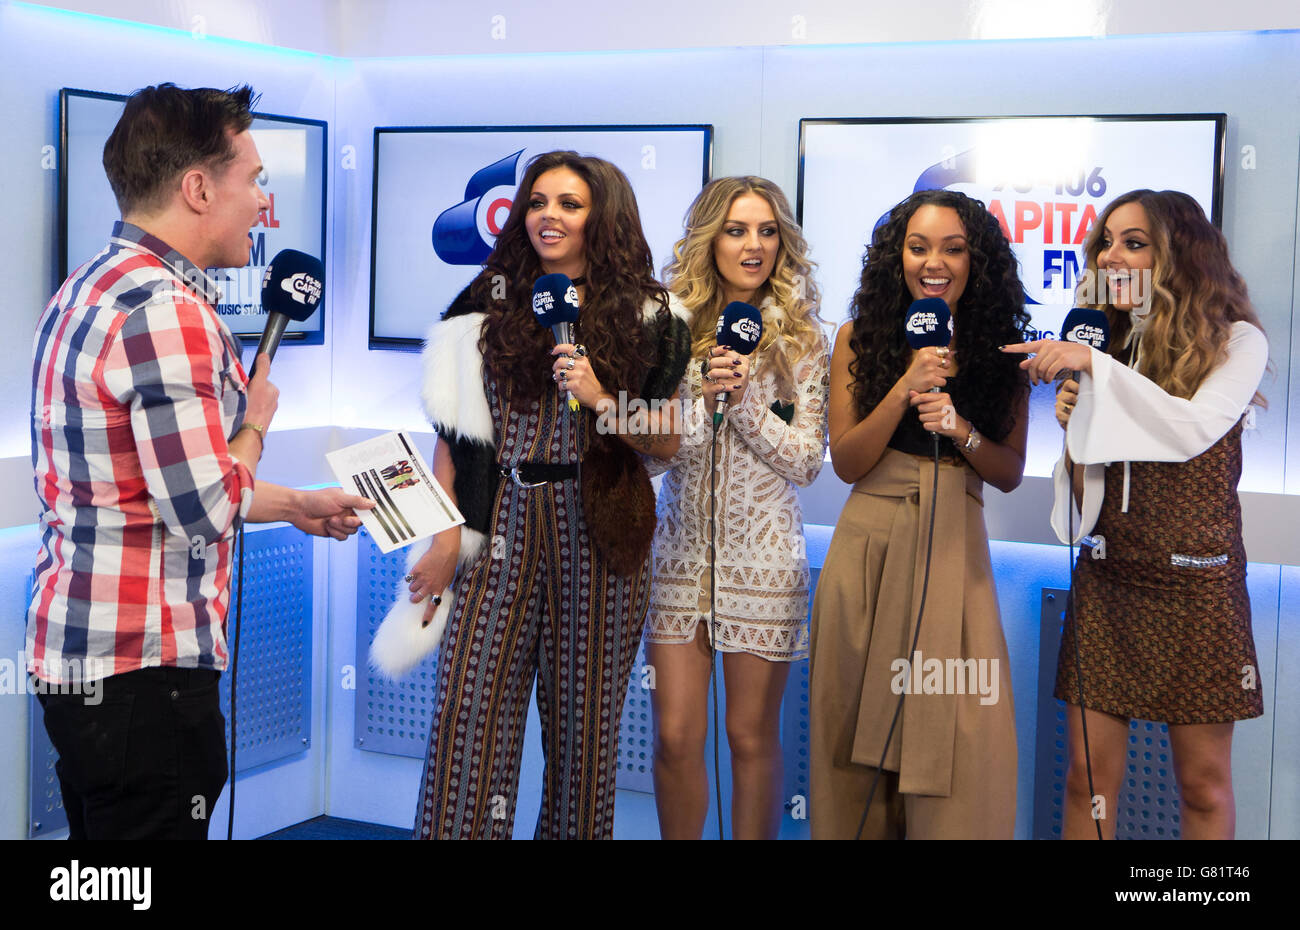 Capital FM presenter Greg Burns and Jesy Nelson, Perrie Edwards, Leigh-Anne  Pinnock and Jade Thirlwall from Little Mix during an interview at Capital FM  Summertime Ball Radio studio, Wembley Stadium, London. Daniel